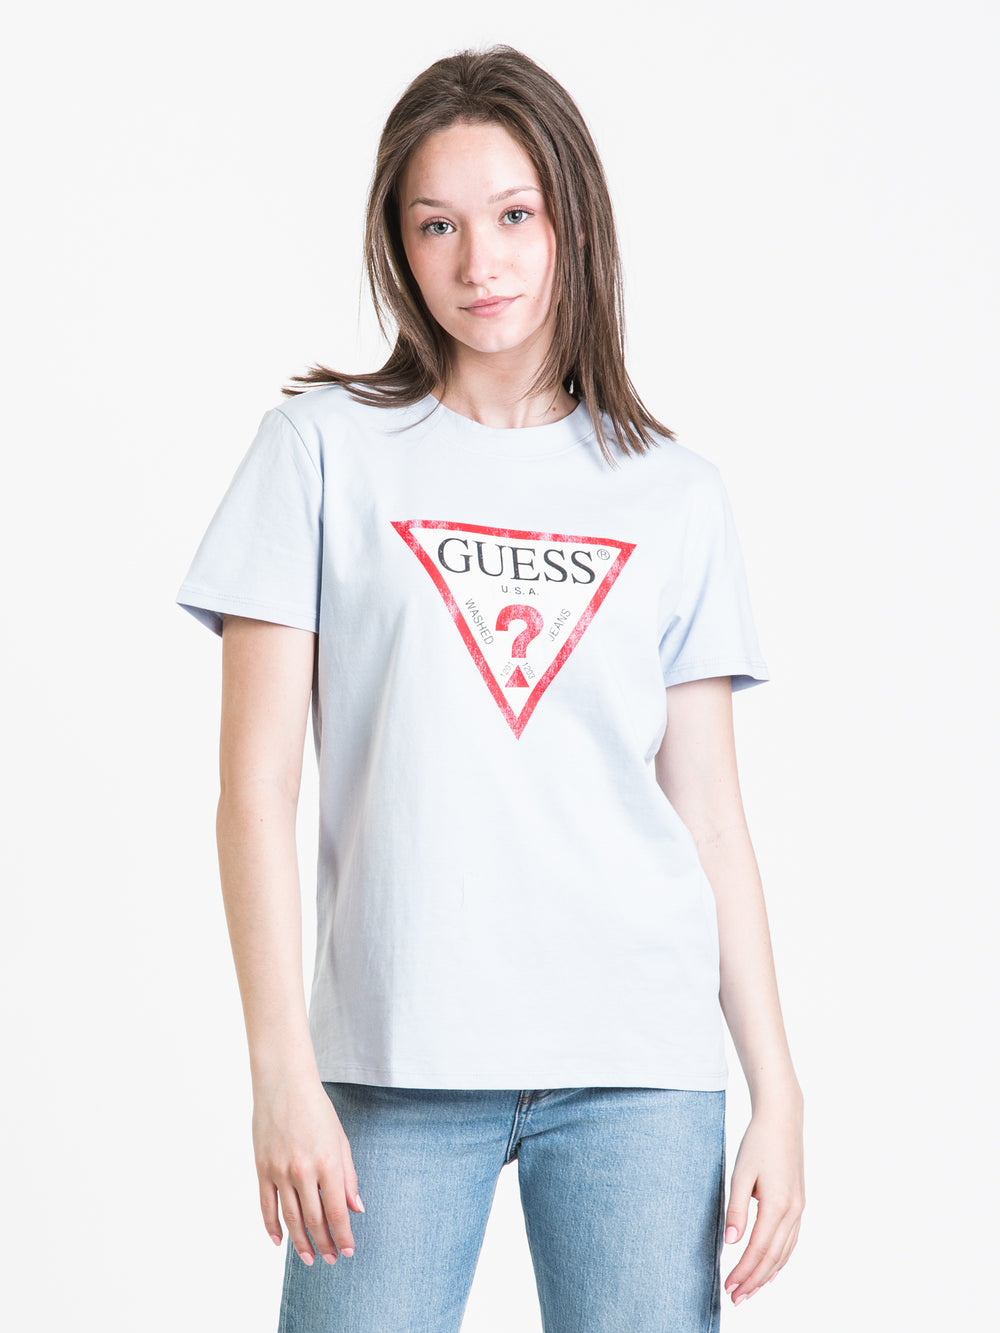 GUESS CLASSIC FIT LOGO T-SHIRT - CLEARANCE